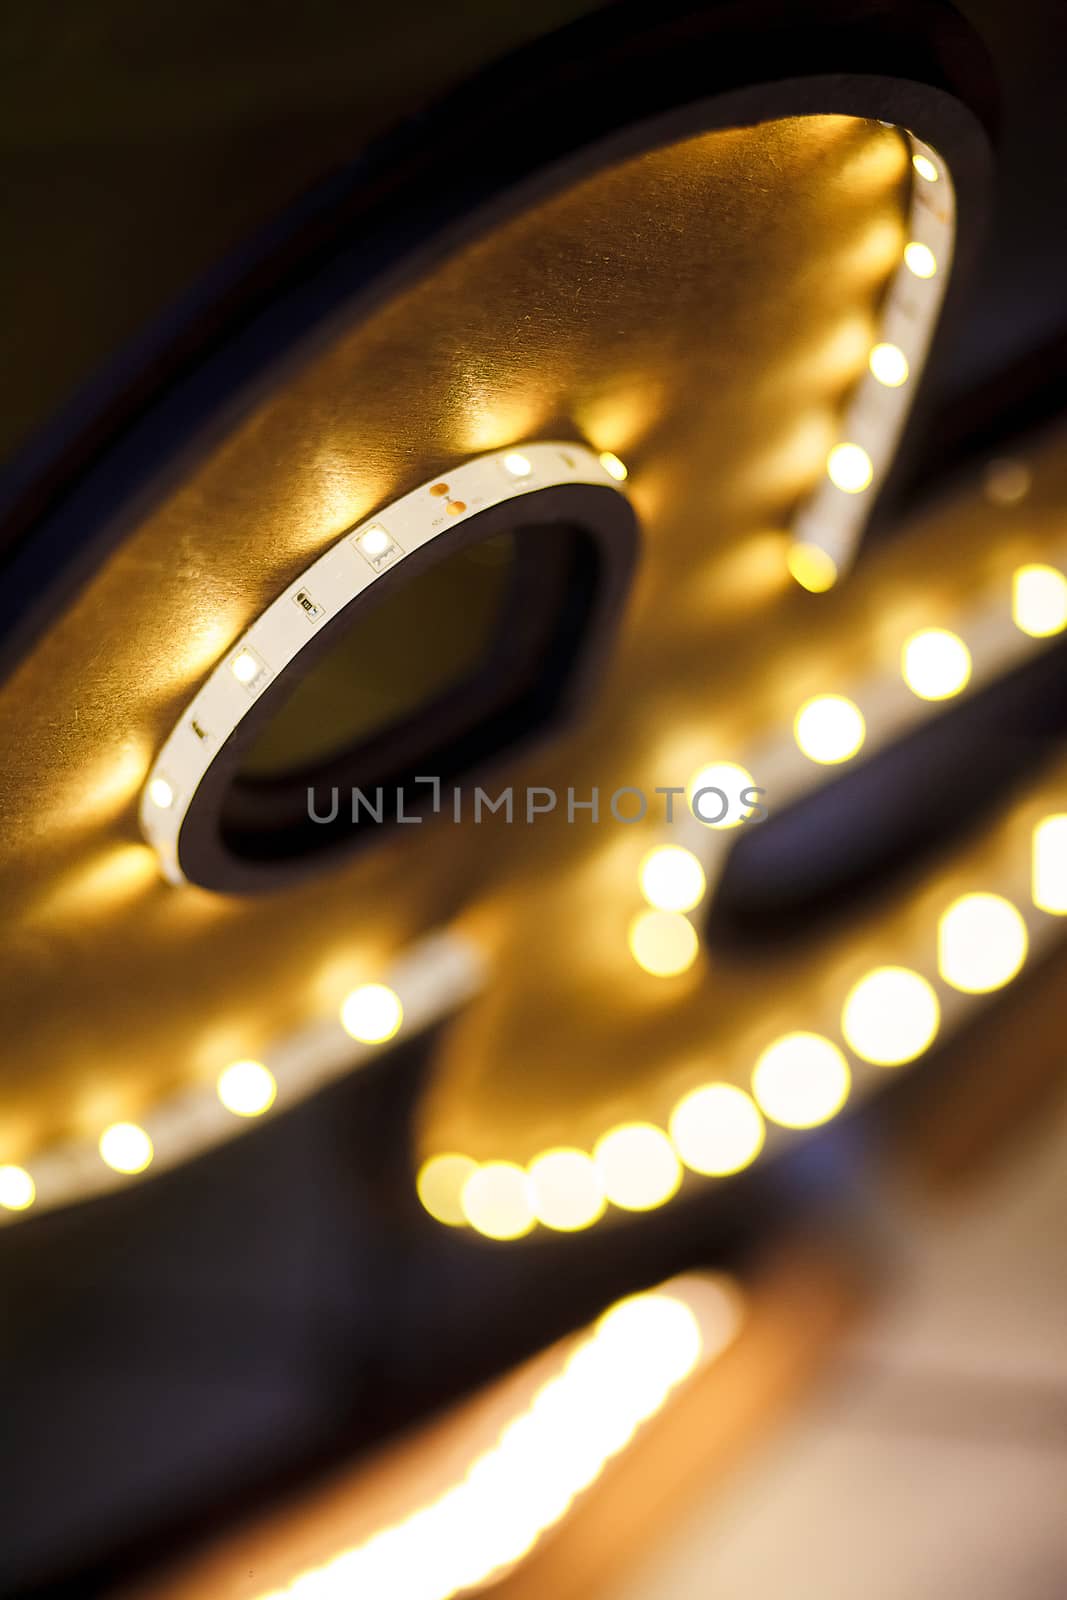 LED strip in a wooden frame, shallow depth of field